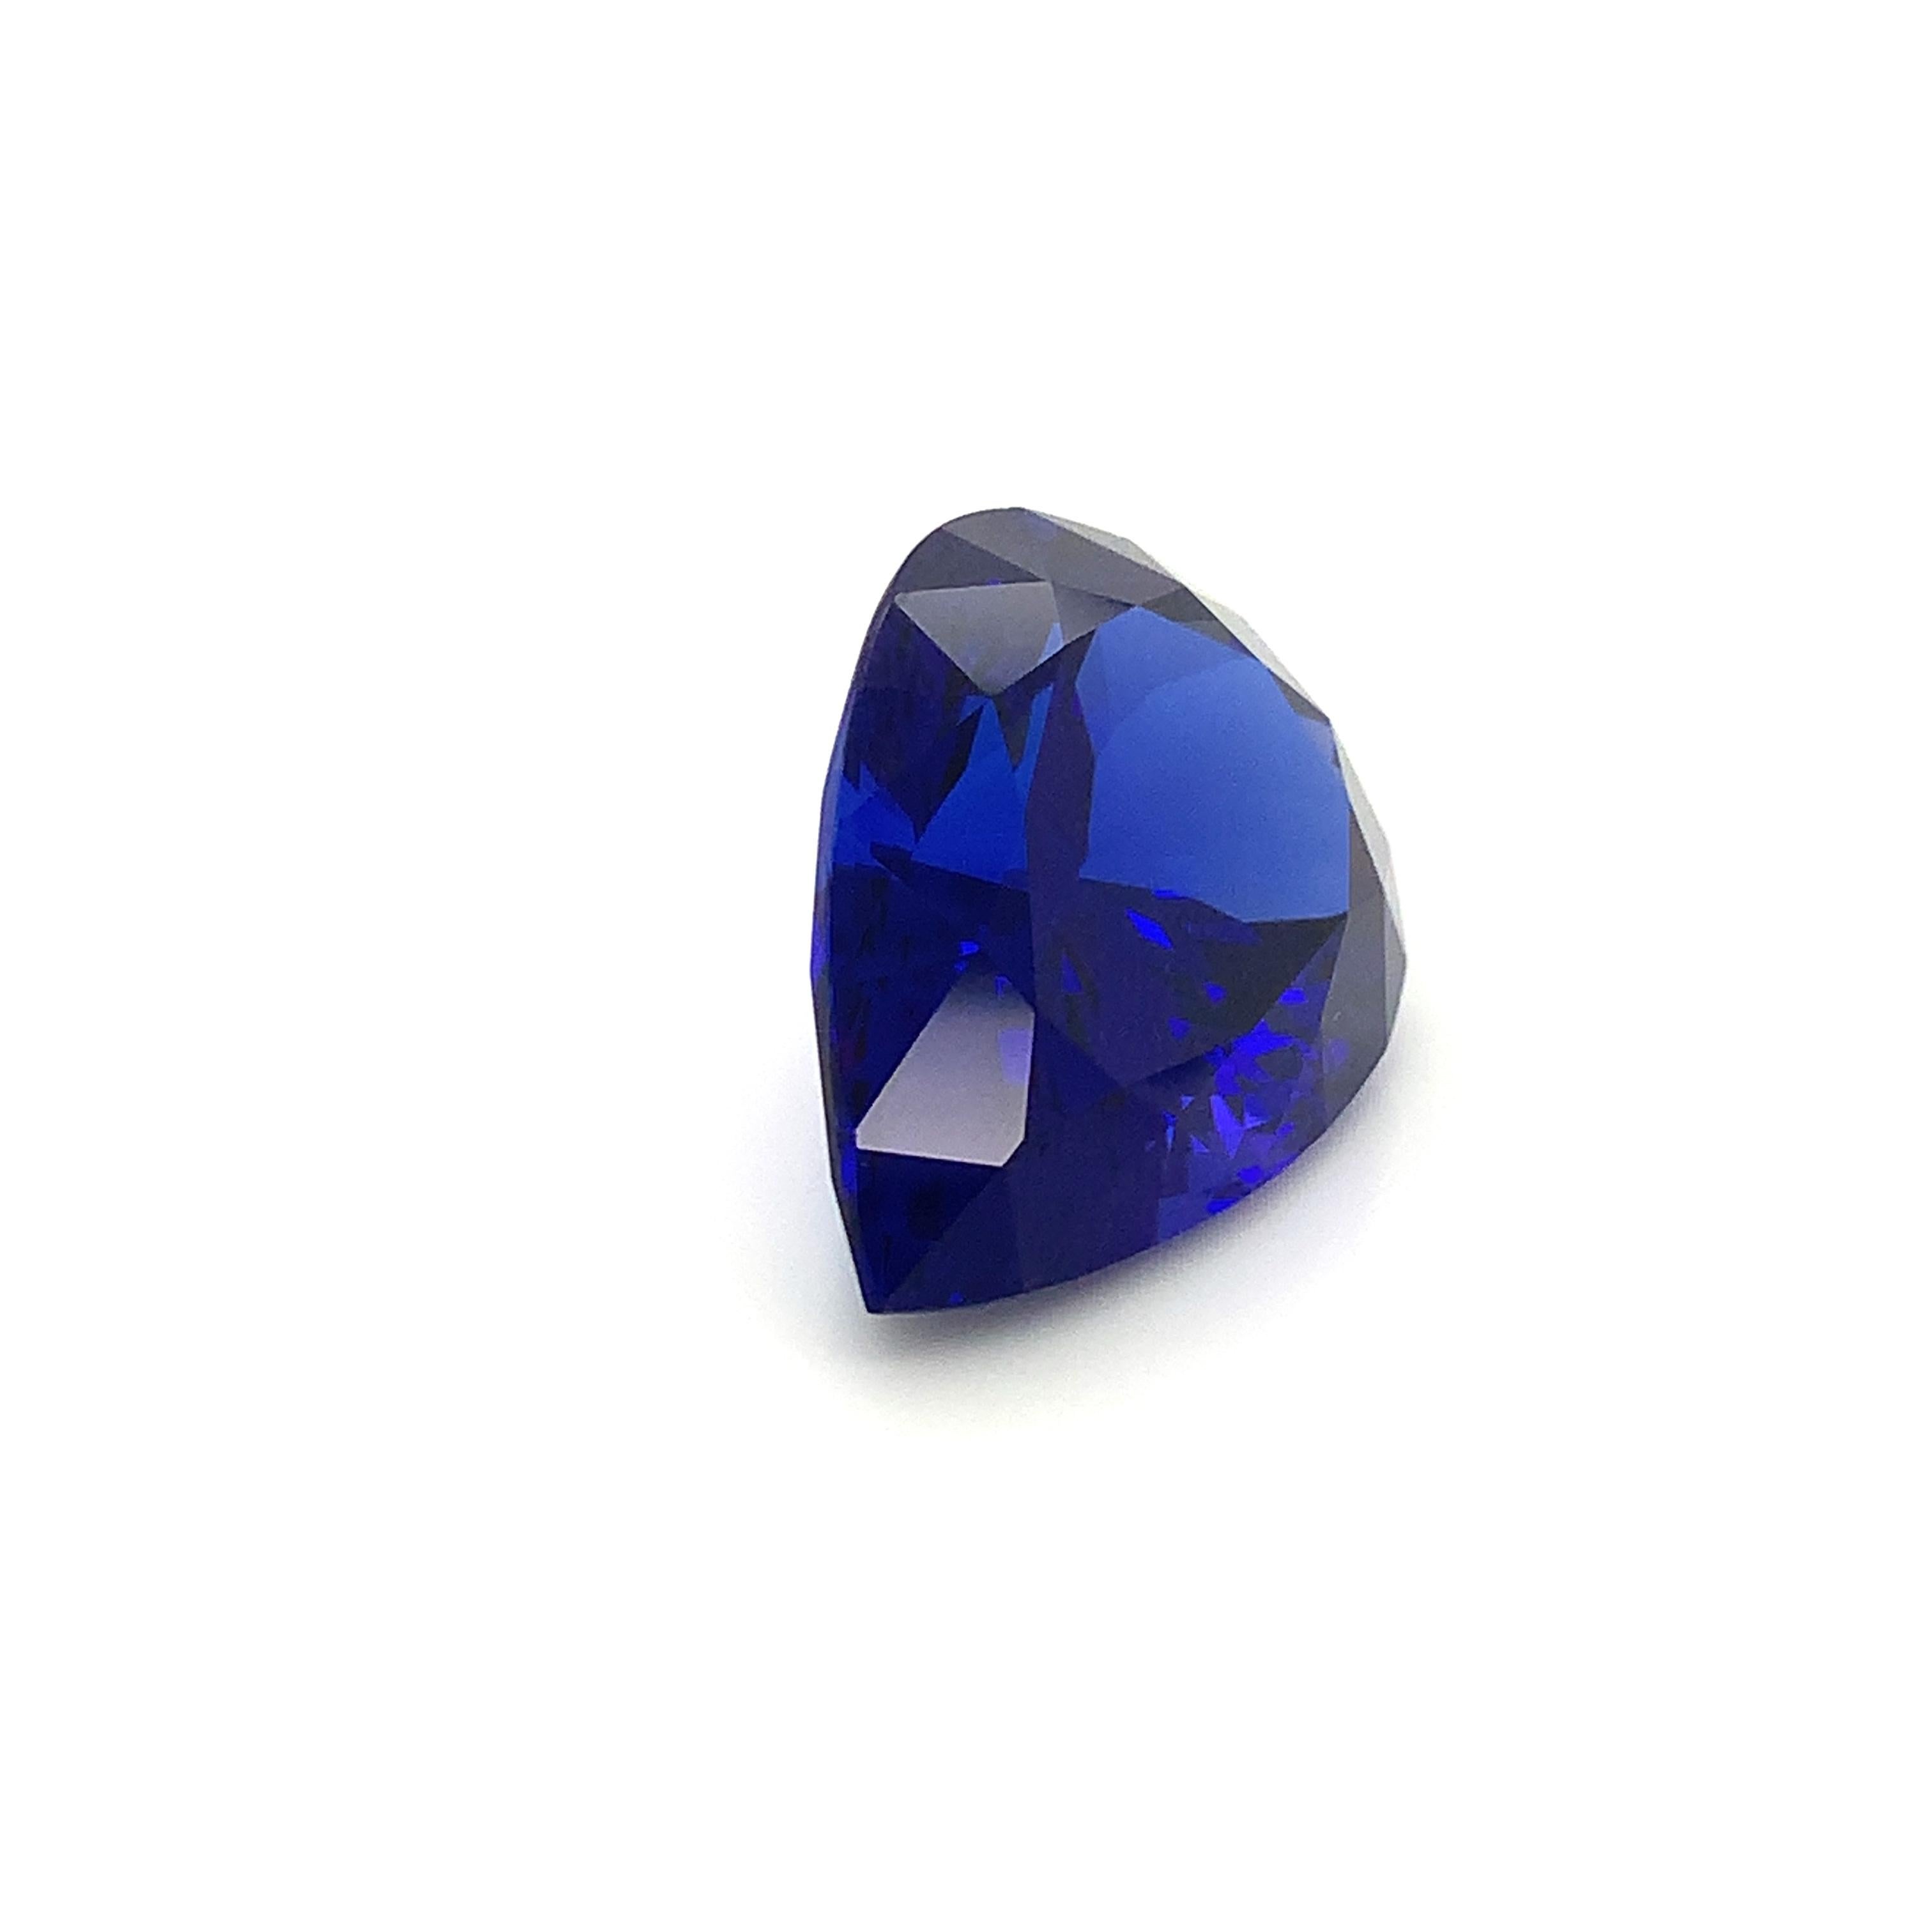 Stunning 51.15 Cts Tanzanite pear shape cut gem offered loose to a very special occasion.
Top colour and very clean, this stone is a masterpiece for an unique design.
Dimension : 29.05 x 20.40 x 14.70 mm
We offer tailor made jewelry work in our